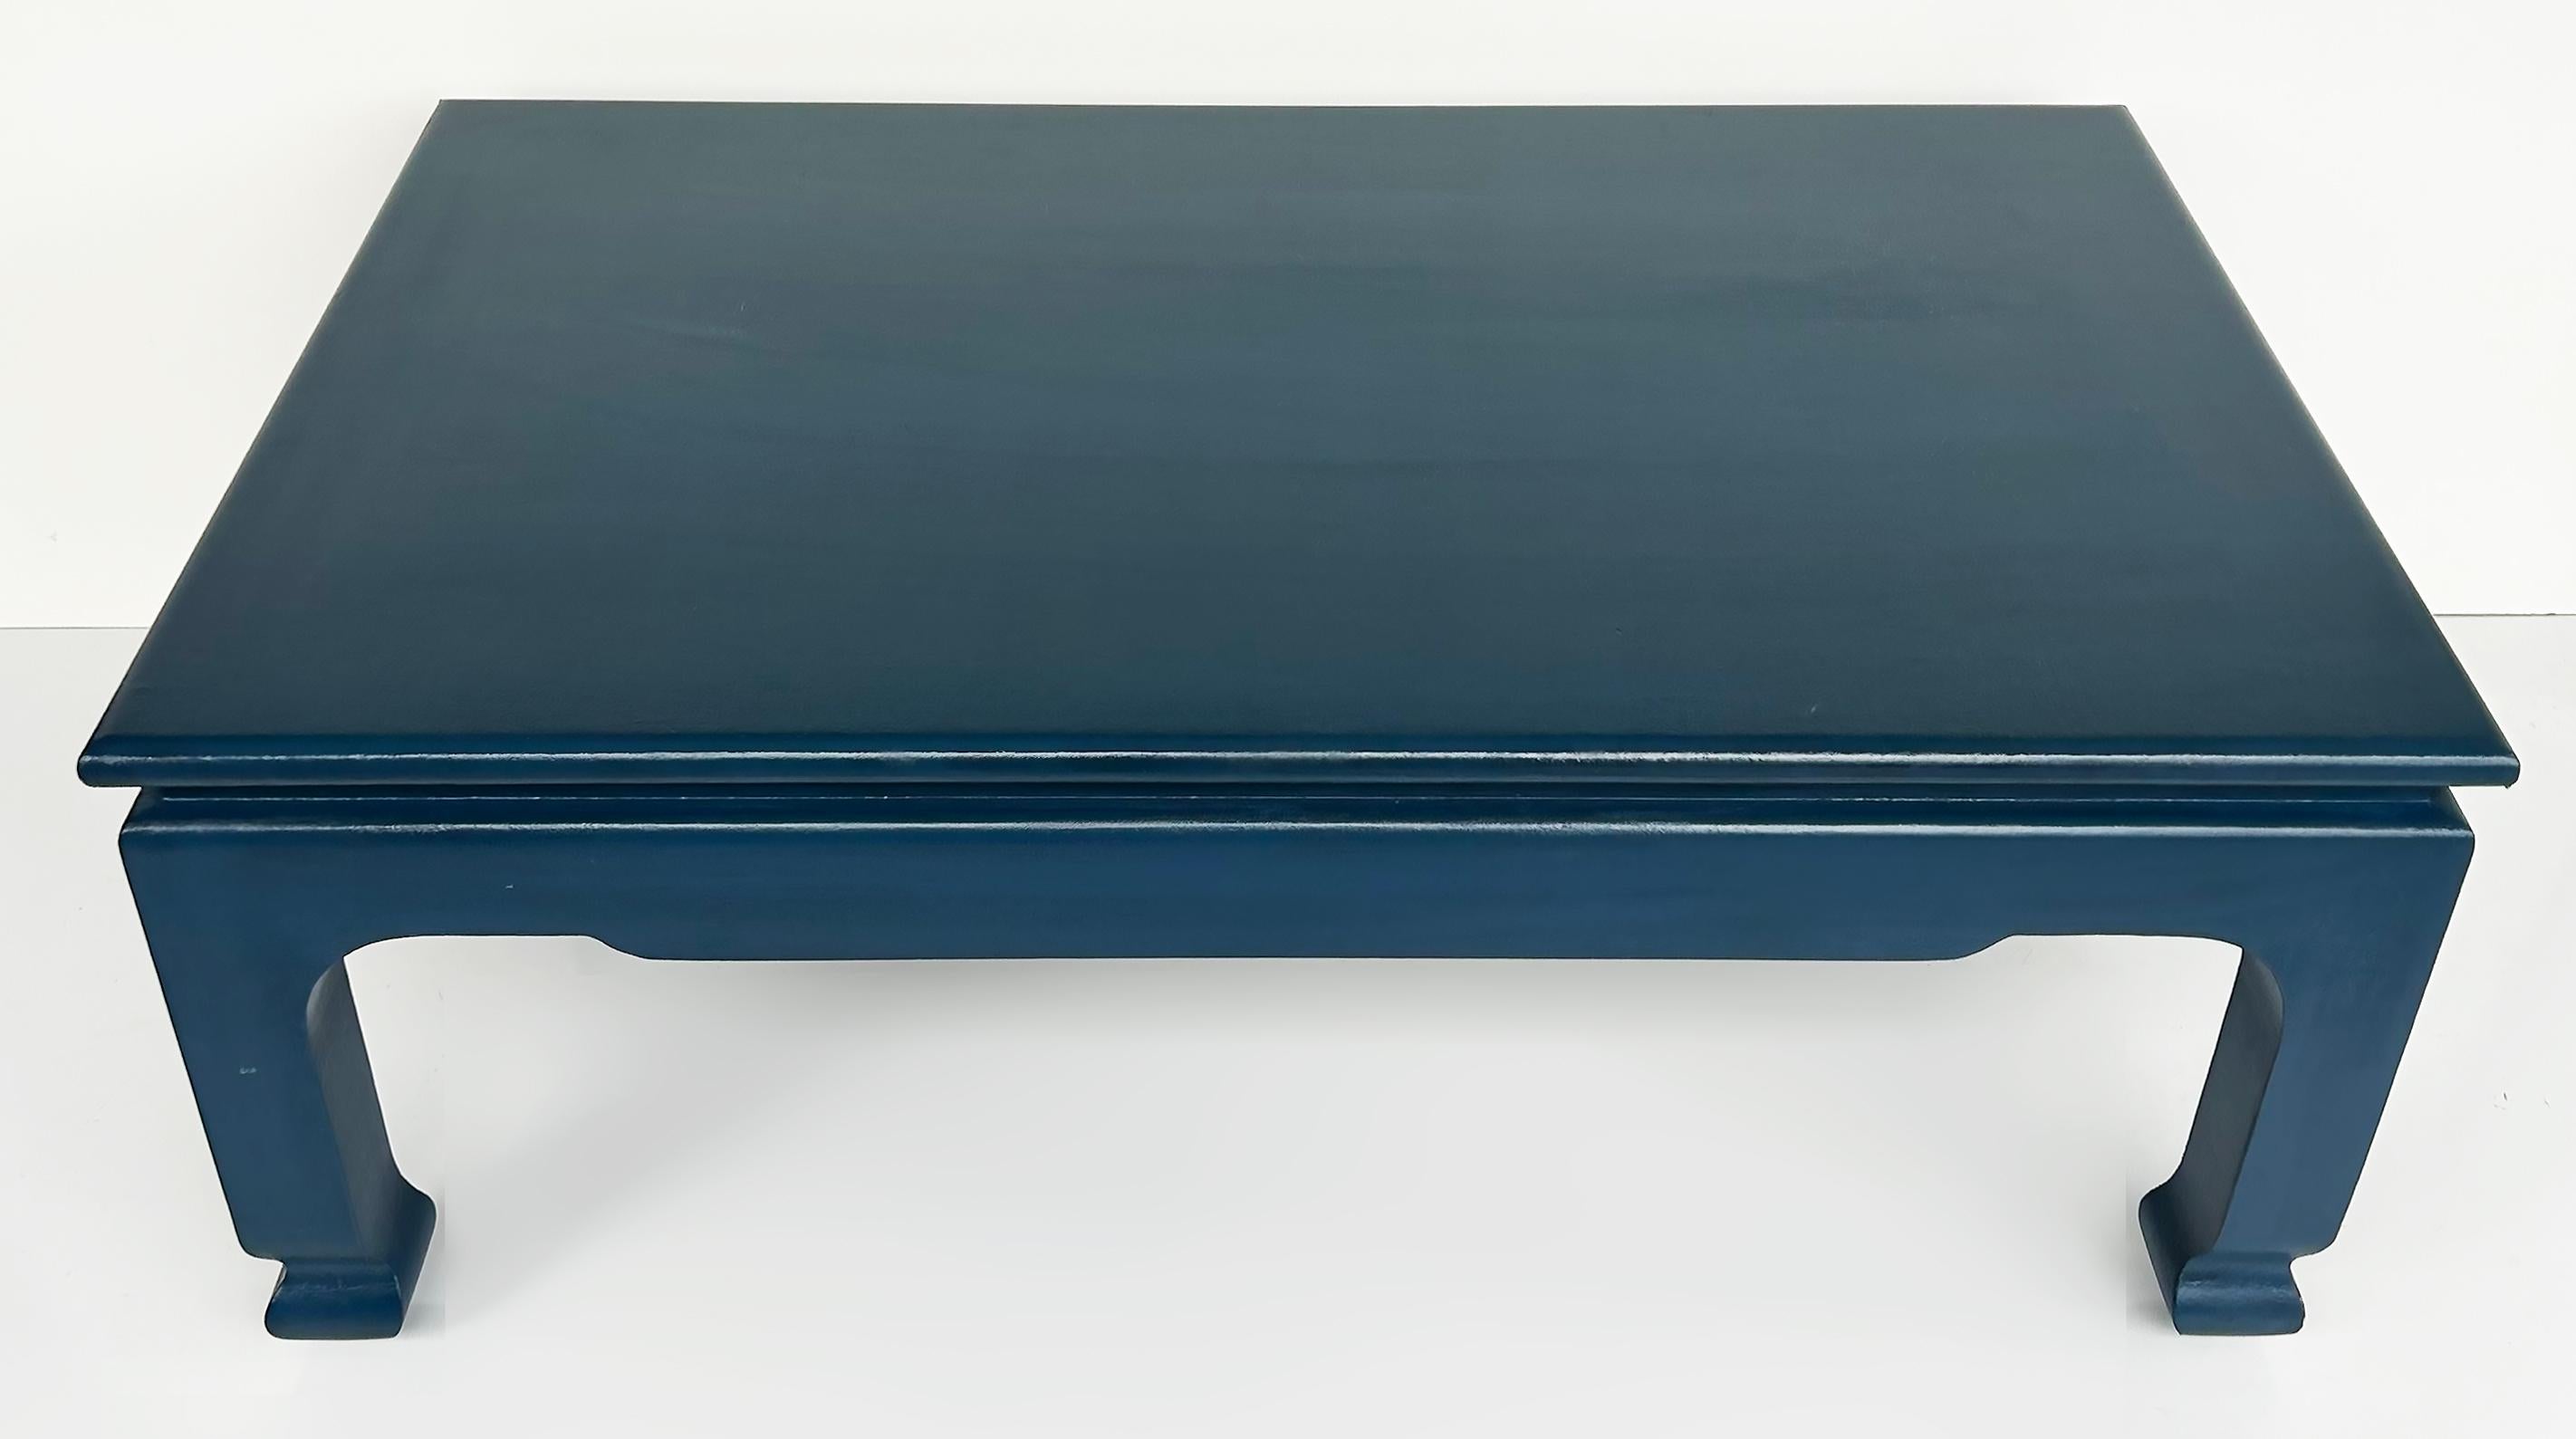 Harrison Van Horn Lacquered Grass Cloth Coffee Table, 1980s Los Angeles In Good Condition For Sale In Miami, FL